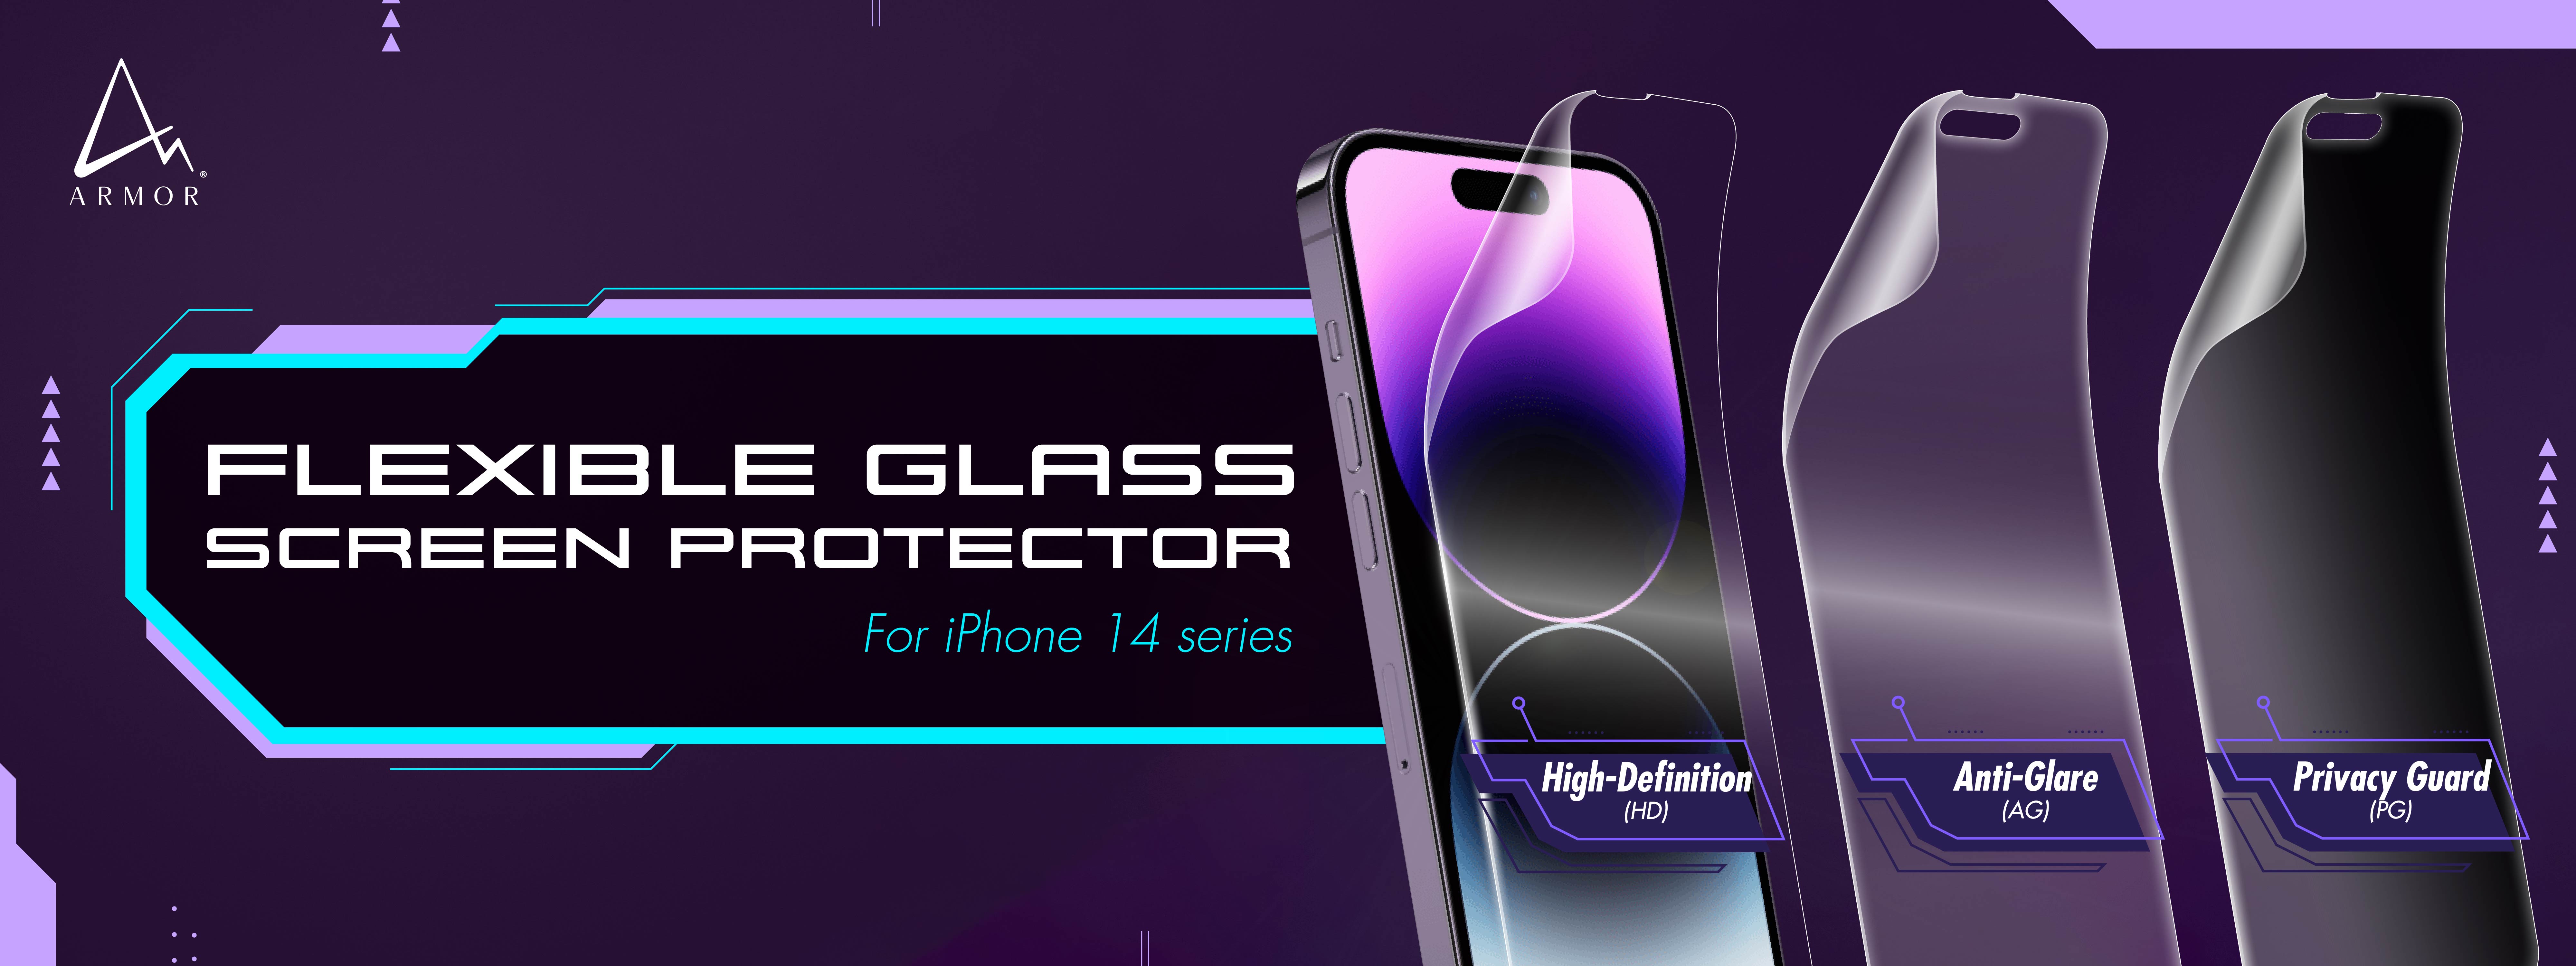 iPhone 14 - 9H Hardness Flexible Glass Screen Protector